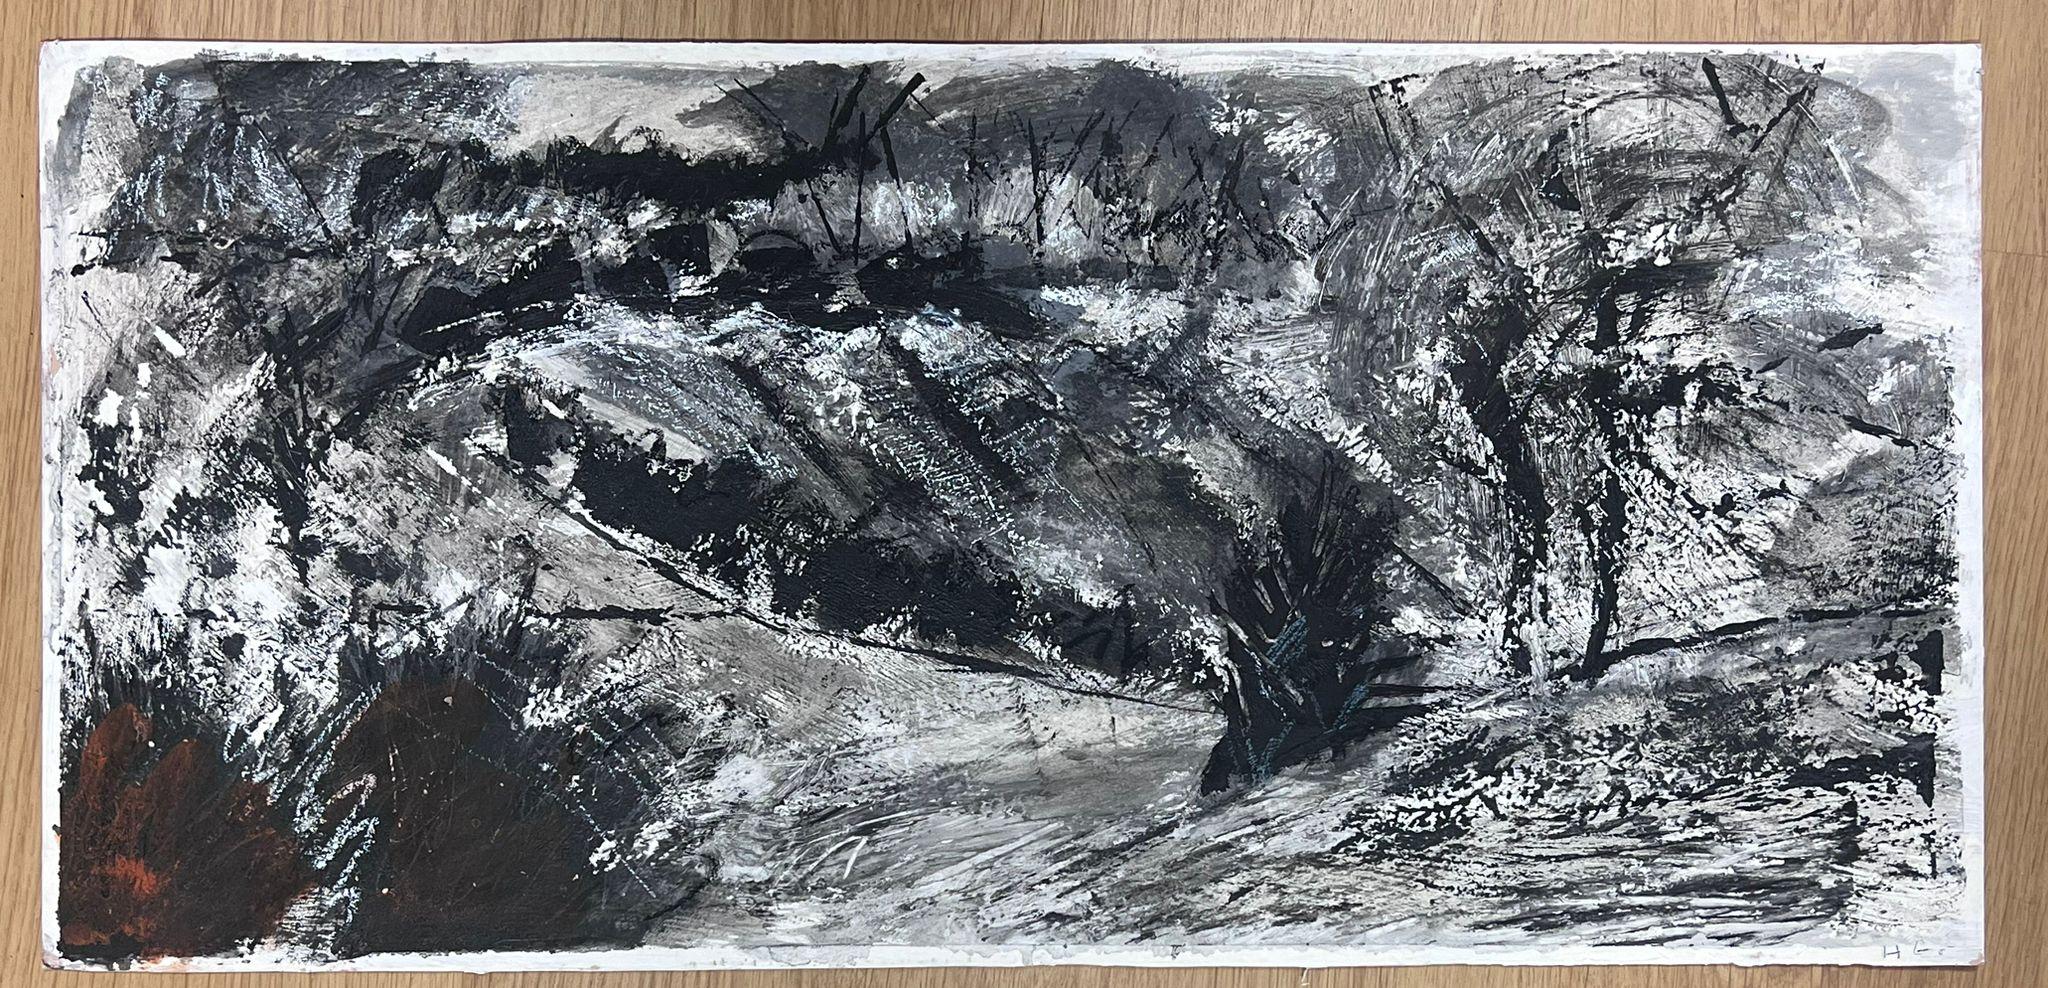 Black and White Abstract 
by Helen Greenfield (British 20th century) 
signed initials gouache painting on thin board, unframed
board: 15.5 x 32 inches
condition: overall very good
provenance: all the paintings we have by this artist have come from